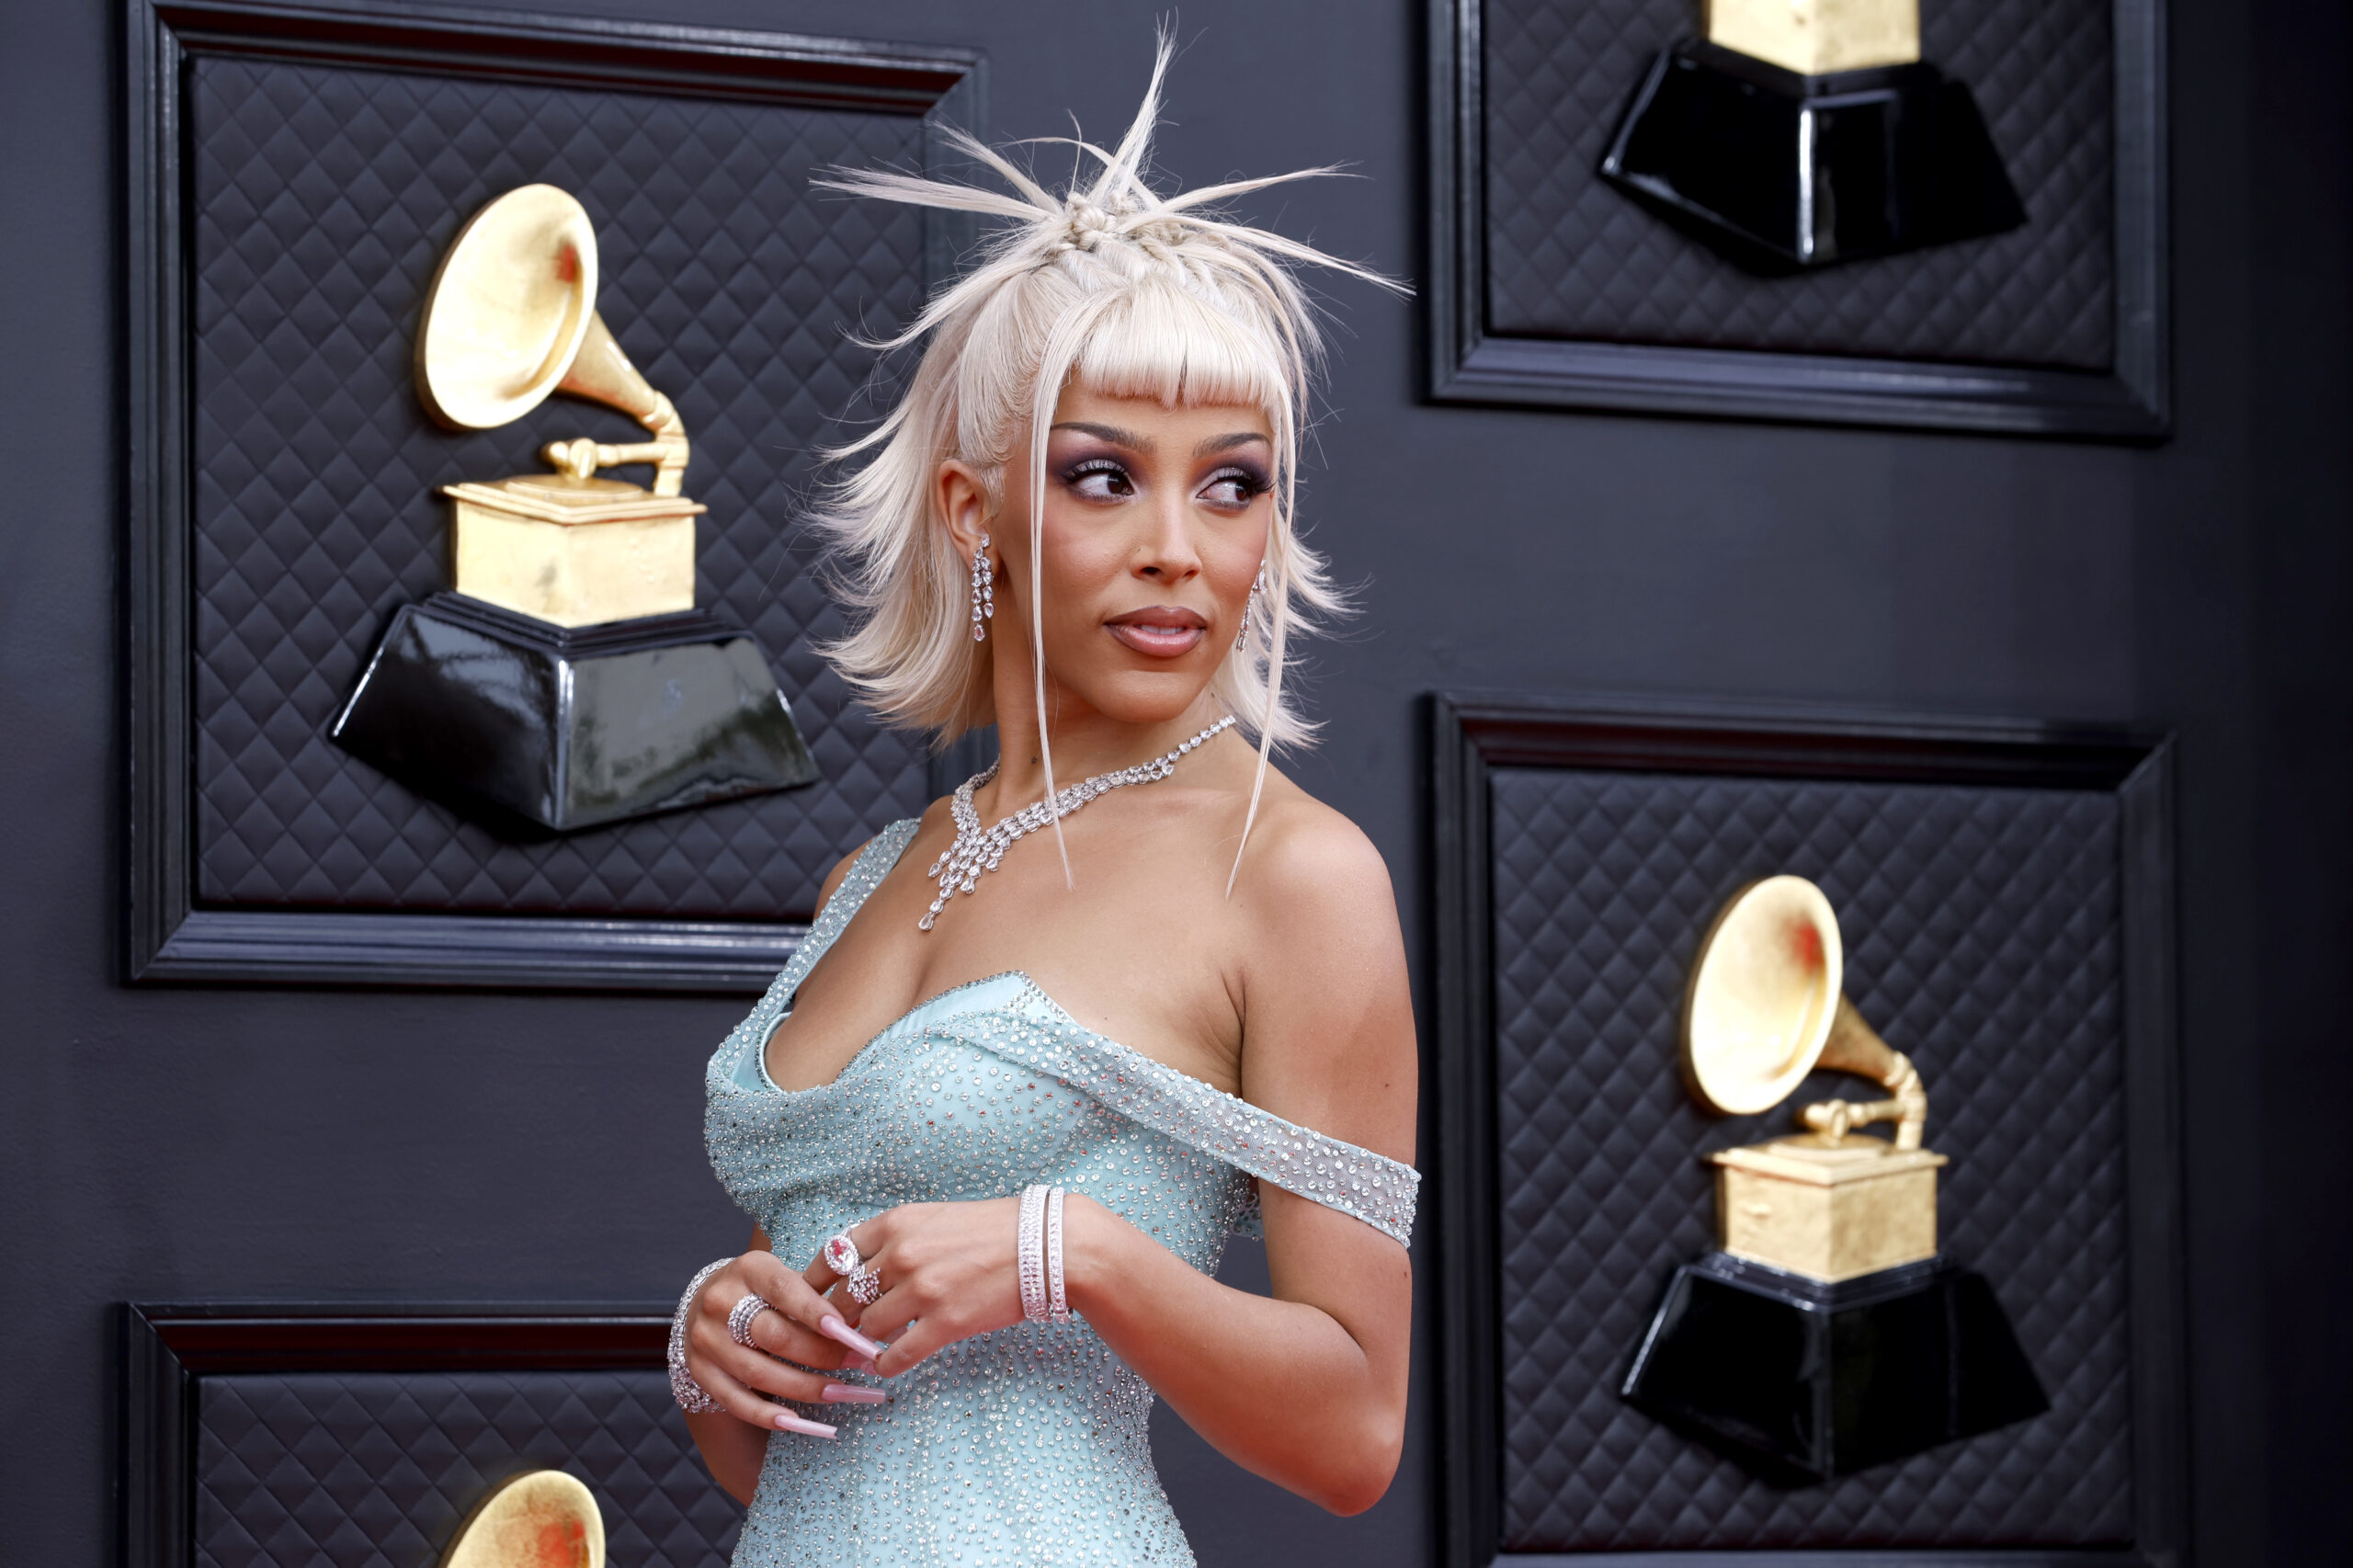 How To Recreate Doja Cat’s Nostalgic, Blonde Hairstyle From The Grammys